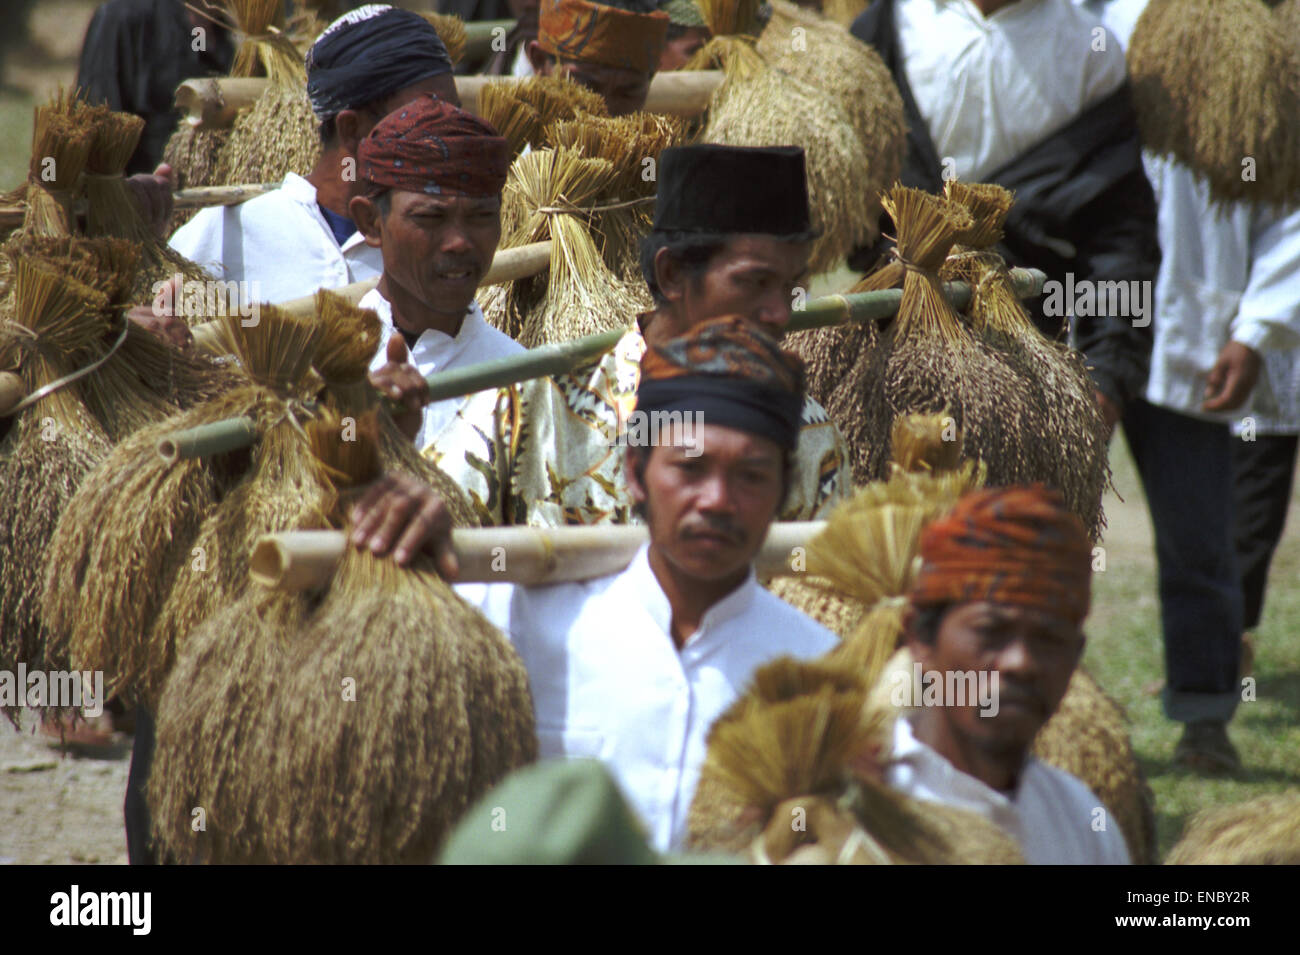 Elders of traditional community carrying bunches of harvested rice during annual harvest thanksgiving festival in Ciptagelar, West Java, Indonesia. Stock Photo